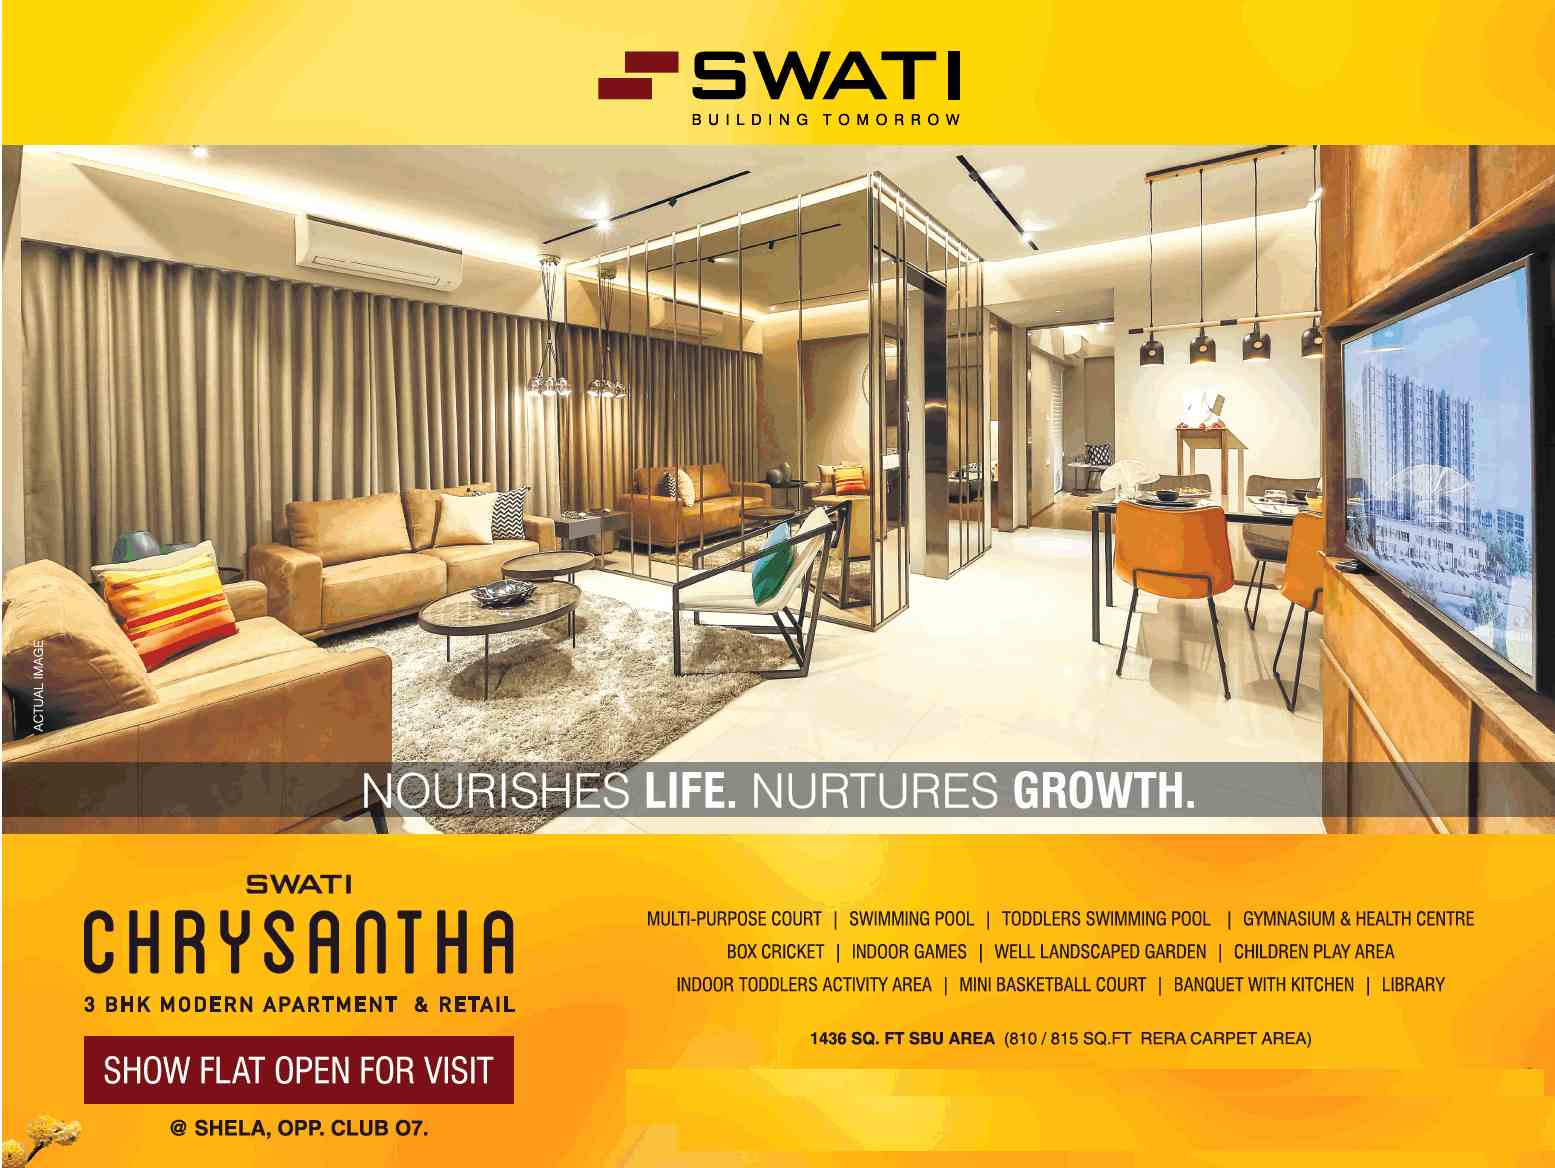 Show flat is now open for visit at Swati Chrysantha in Shela, Ahmedabad Update